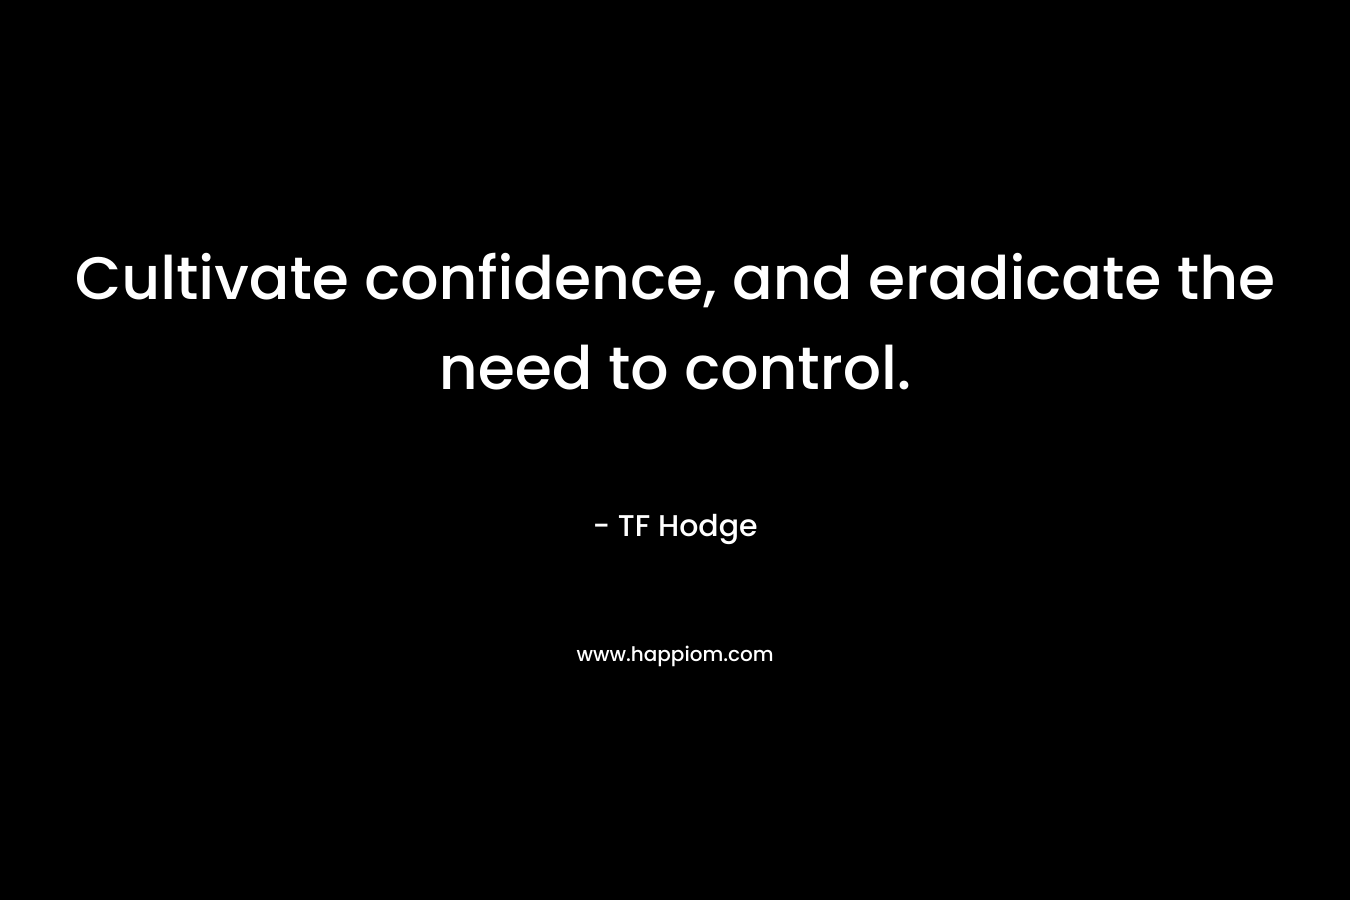 Cultivate confidence, and eradicate the need to control. – TF Hodge